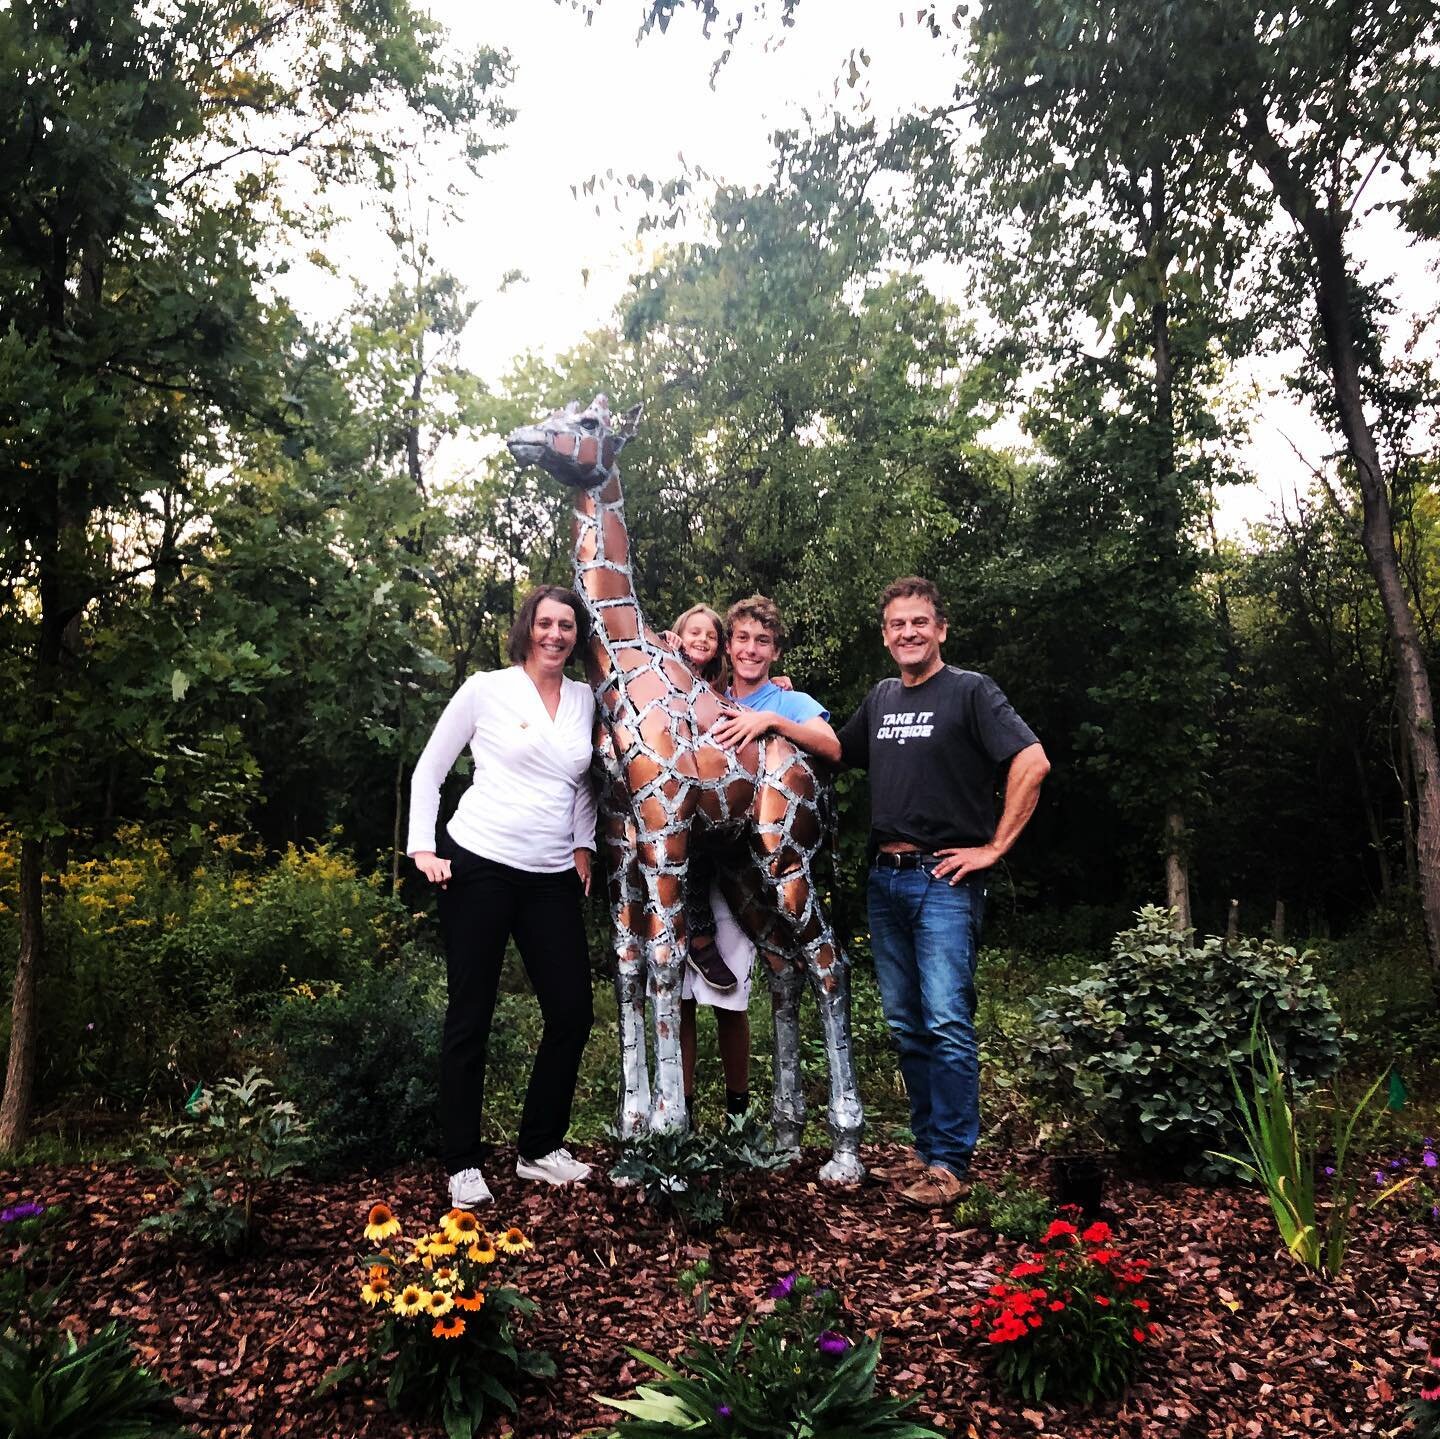 Tonight we delivered this beautiful piece by Bill Allen to an excited and wonderful family in Ann Arbor, who have made this giraffe (initially named &ldquo;George&rdquo; by their daughter) the centerpiece of their new landscaping.  It looks gorgeous 